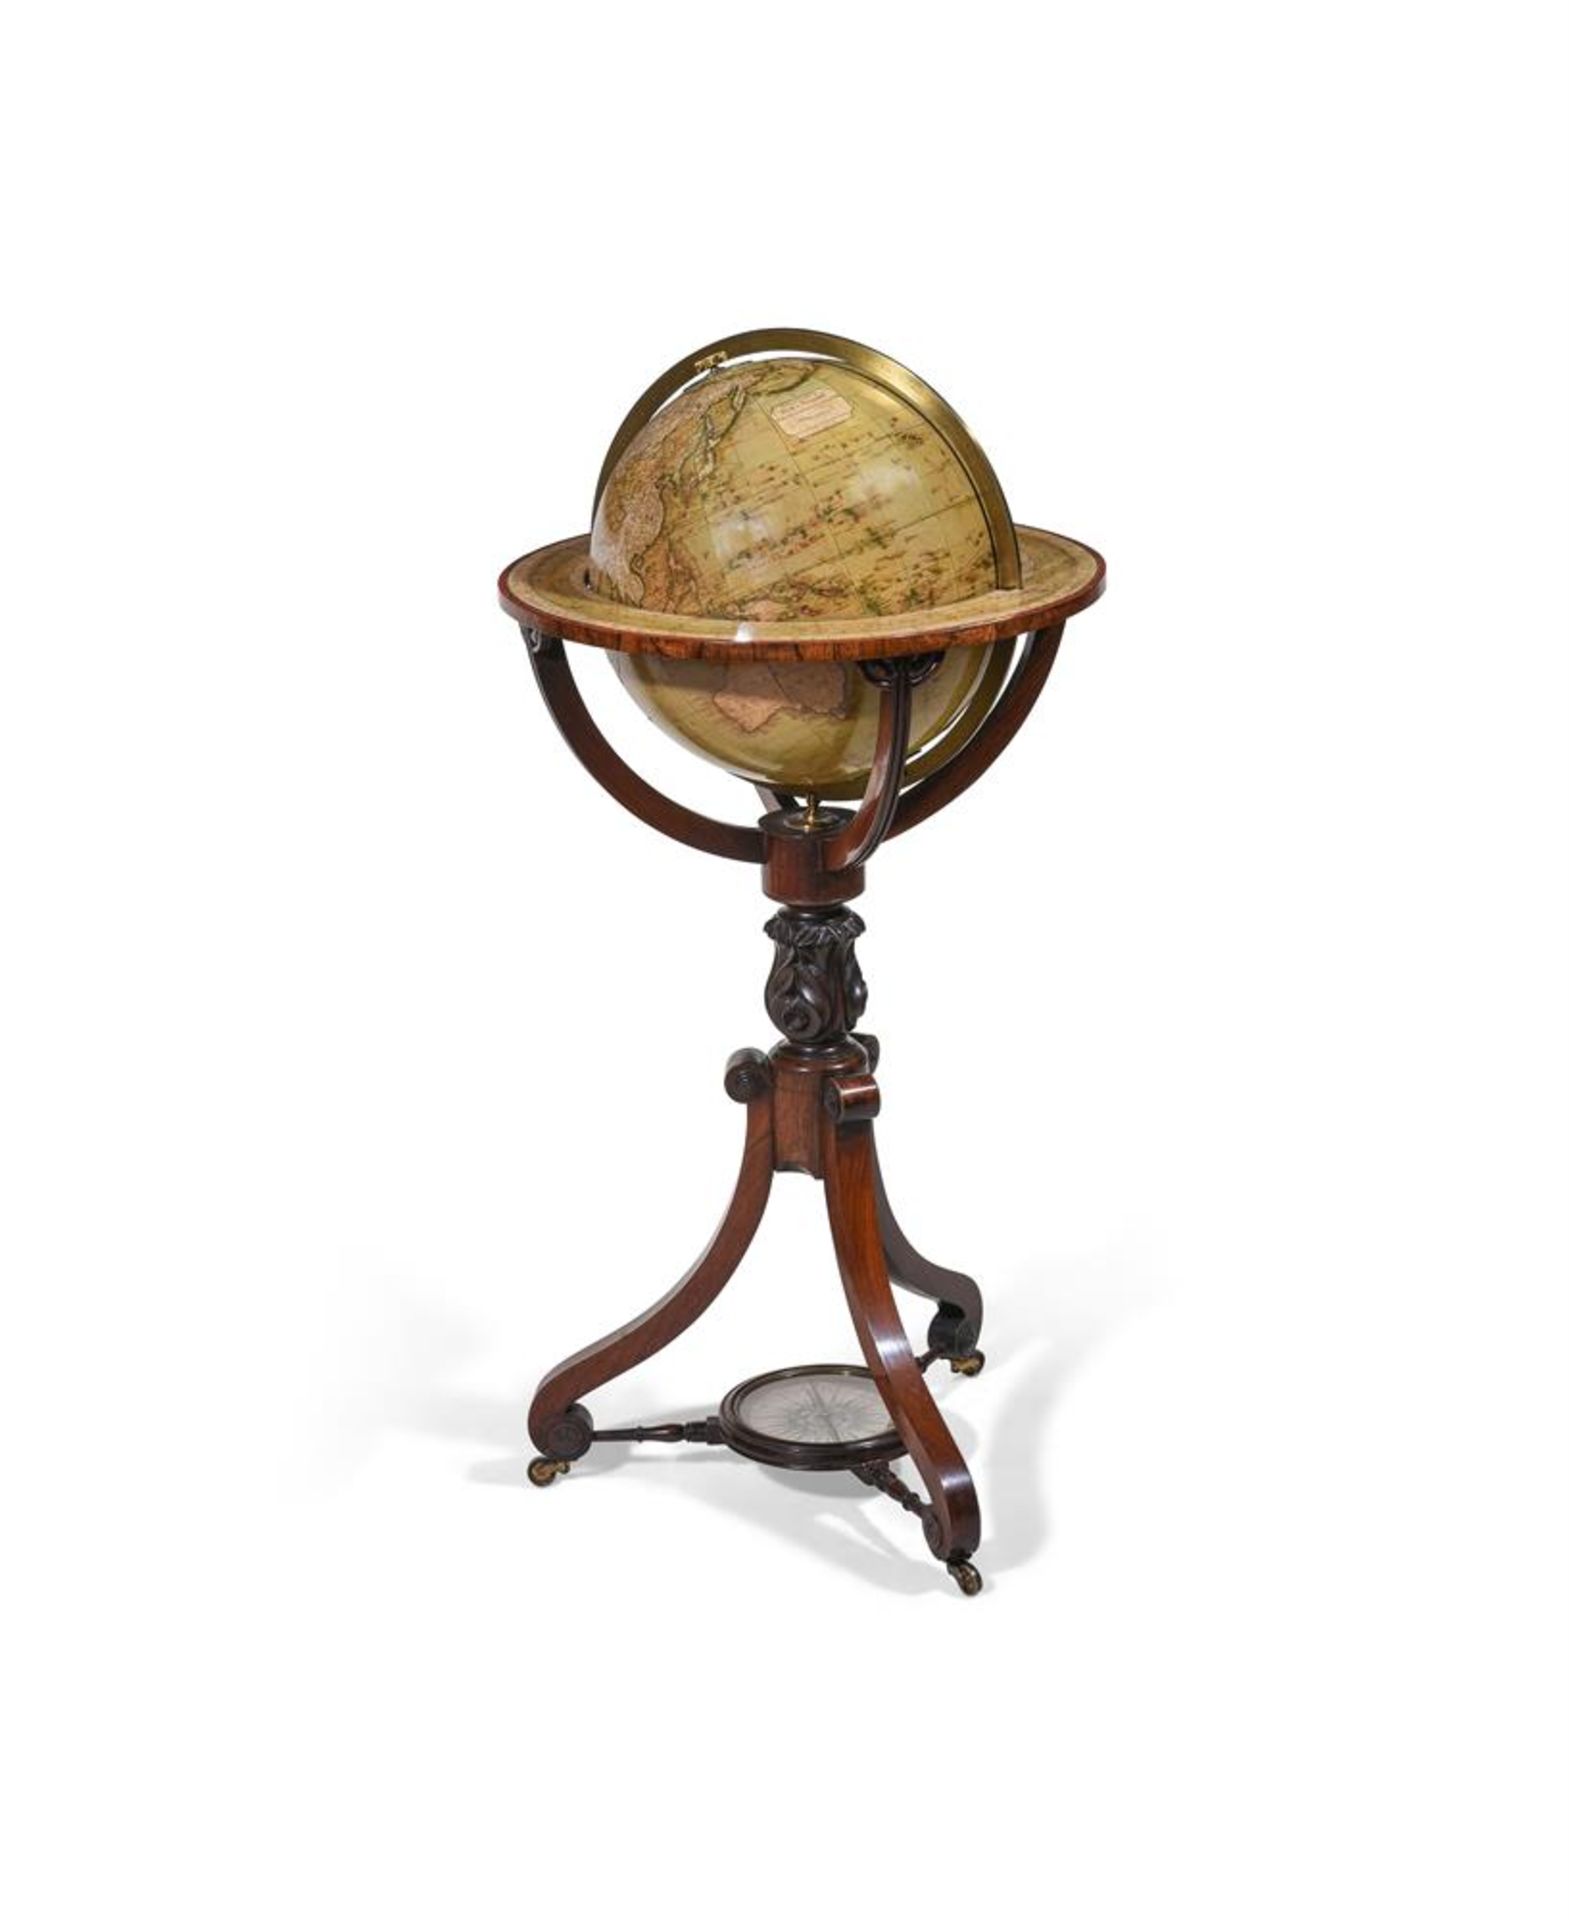 Y A PAIR OF TERRESTRIAL AND CELESTIAL 12 INCH LIBRARY GLOBES ON ROSEWOOD STANDS, BY NEWTON & SON - Image 2 of 7